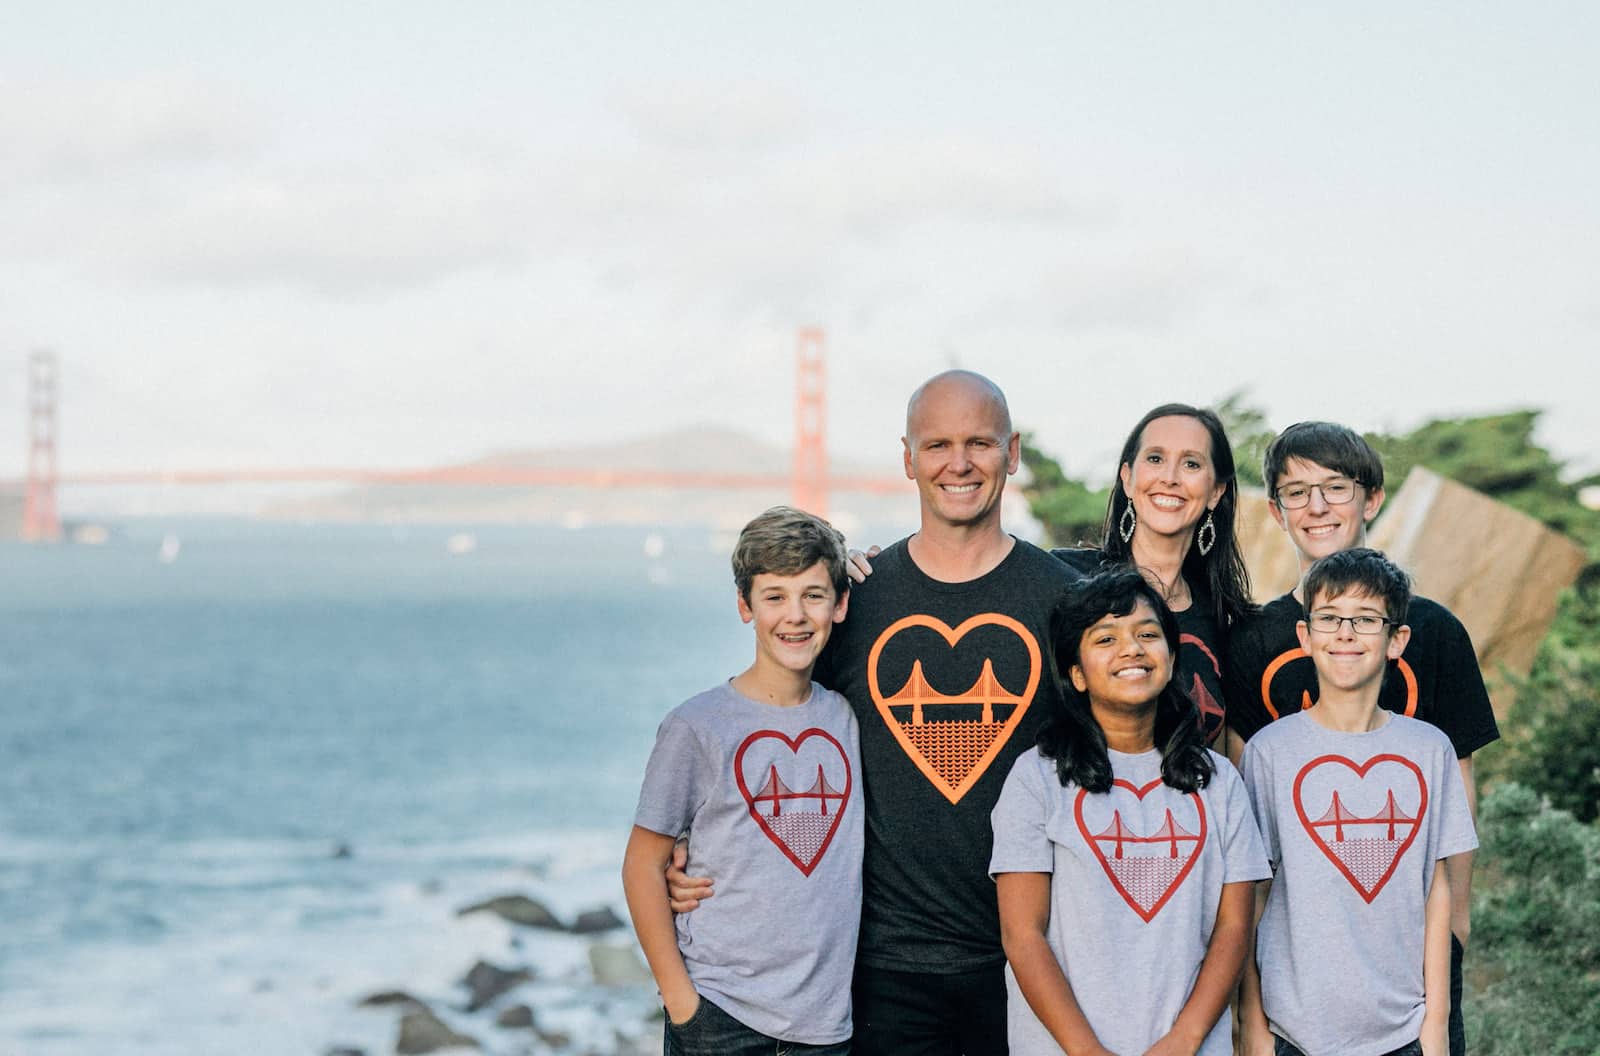 A man and woman and four children stand in front of the Golden Gate Bridge, wearing T-shirts with a graphic of the Golden Gate Bridge on it.